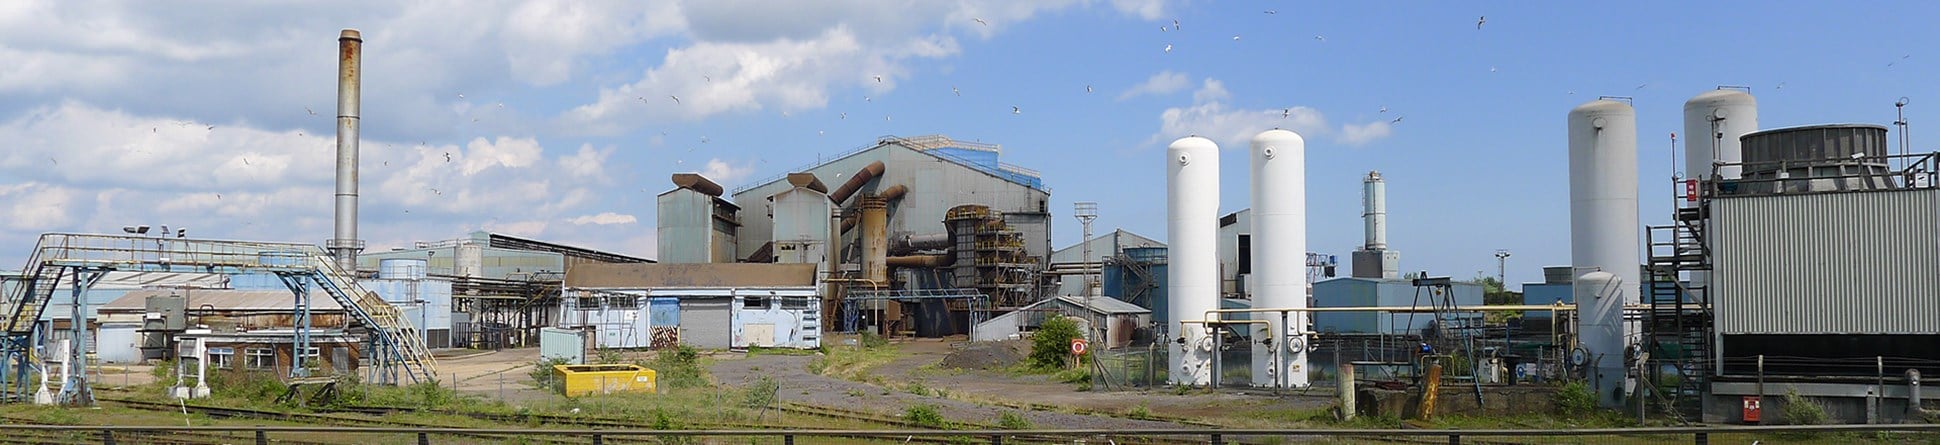 Industrial structures at Thames Steel Works, Sherness Kent